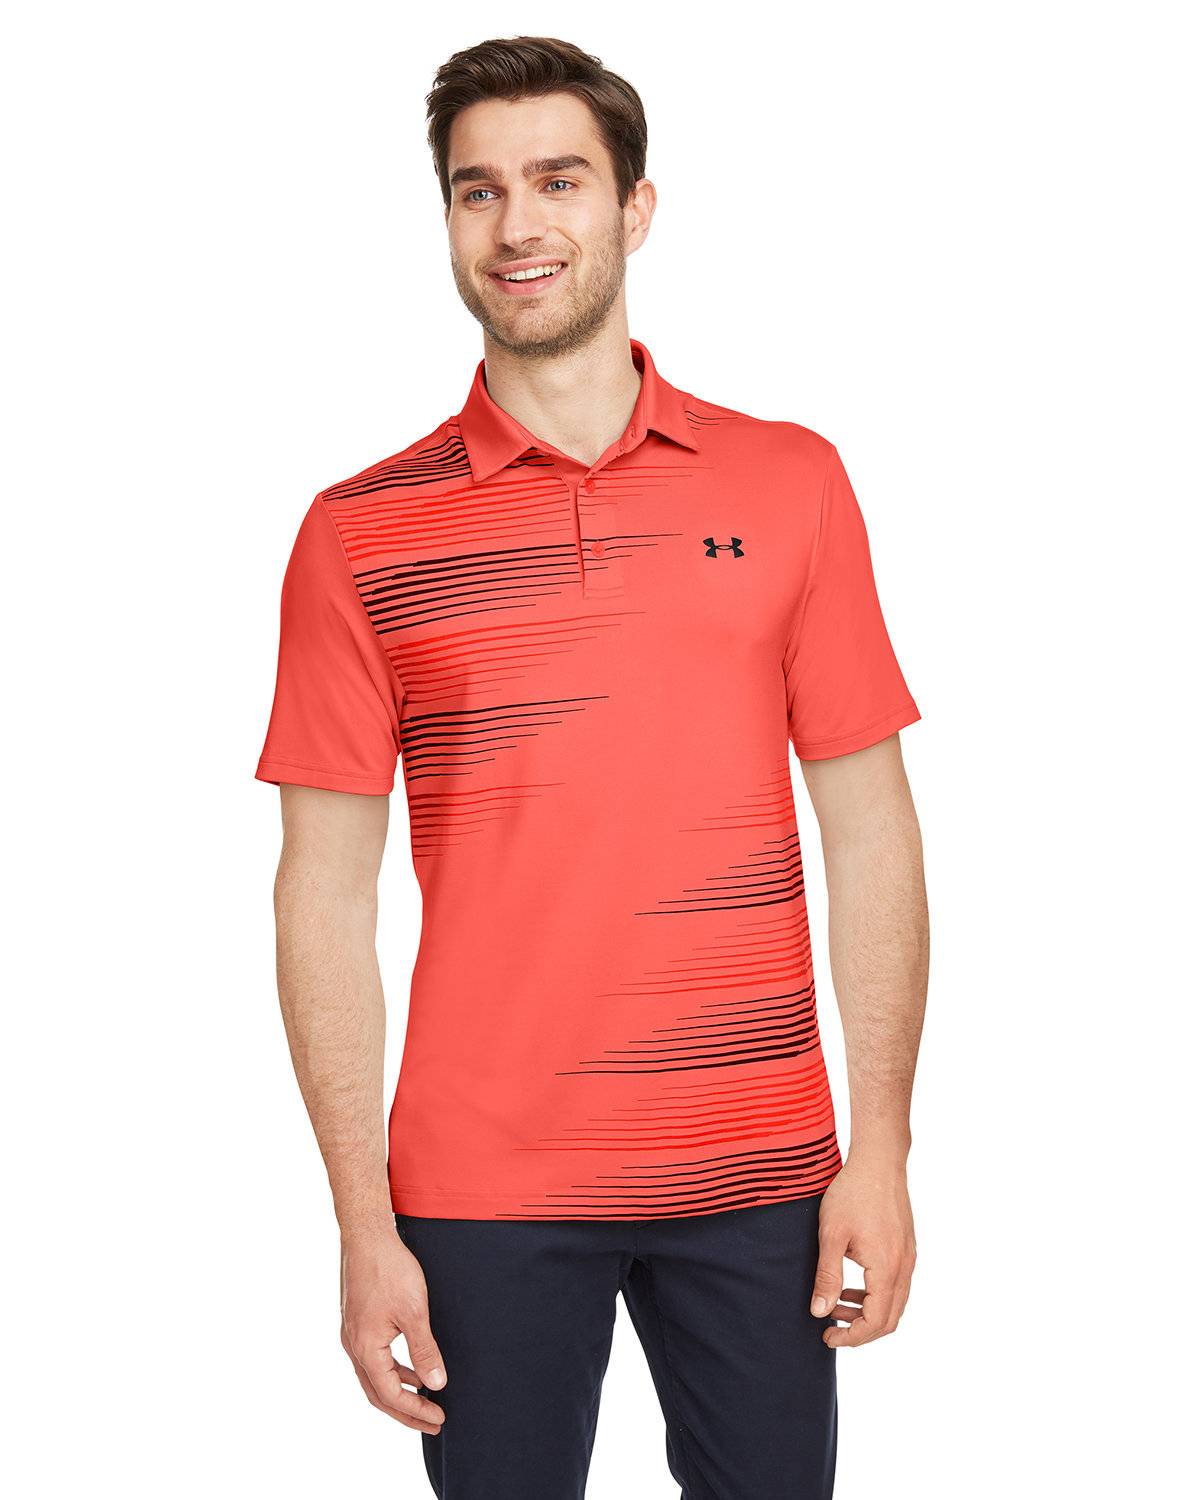 Under Armour 1327037 Mens Playoff Polo 2.0 - Free Shipping Available